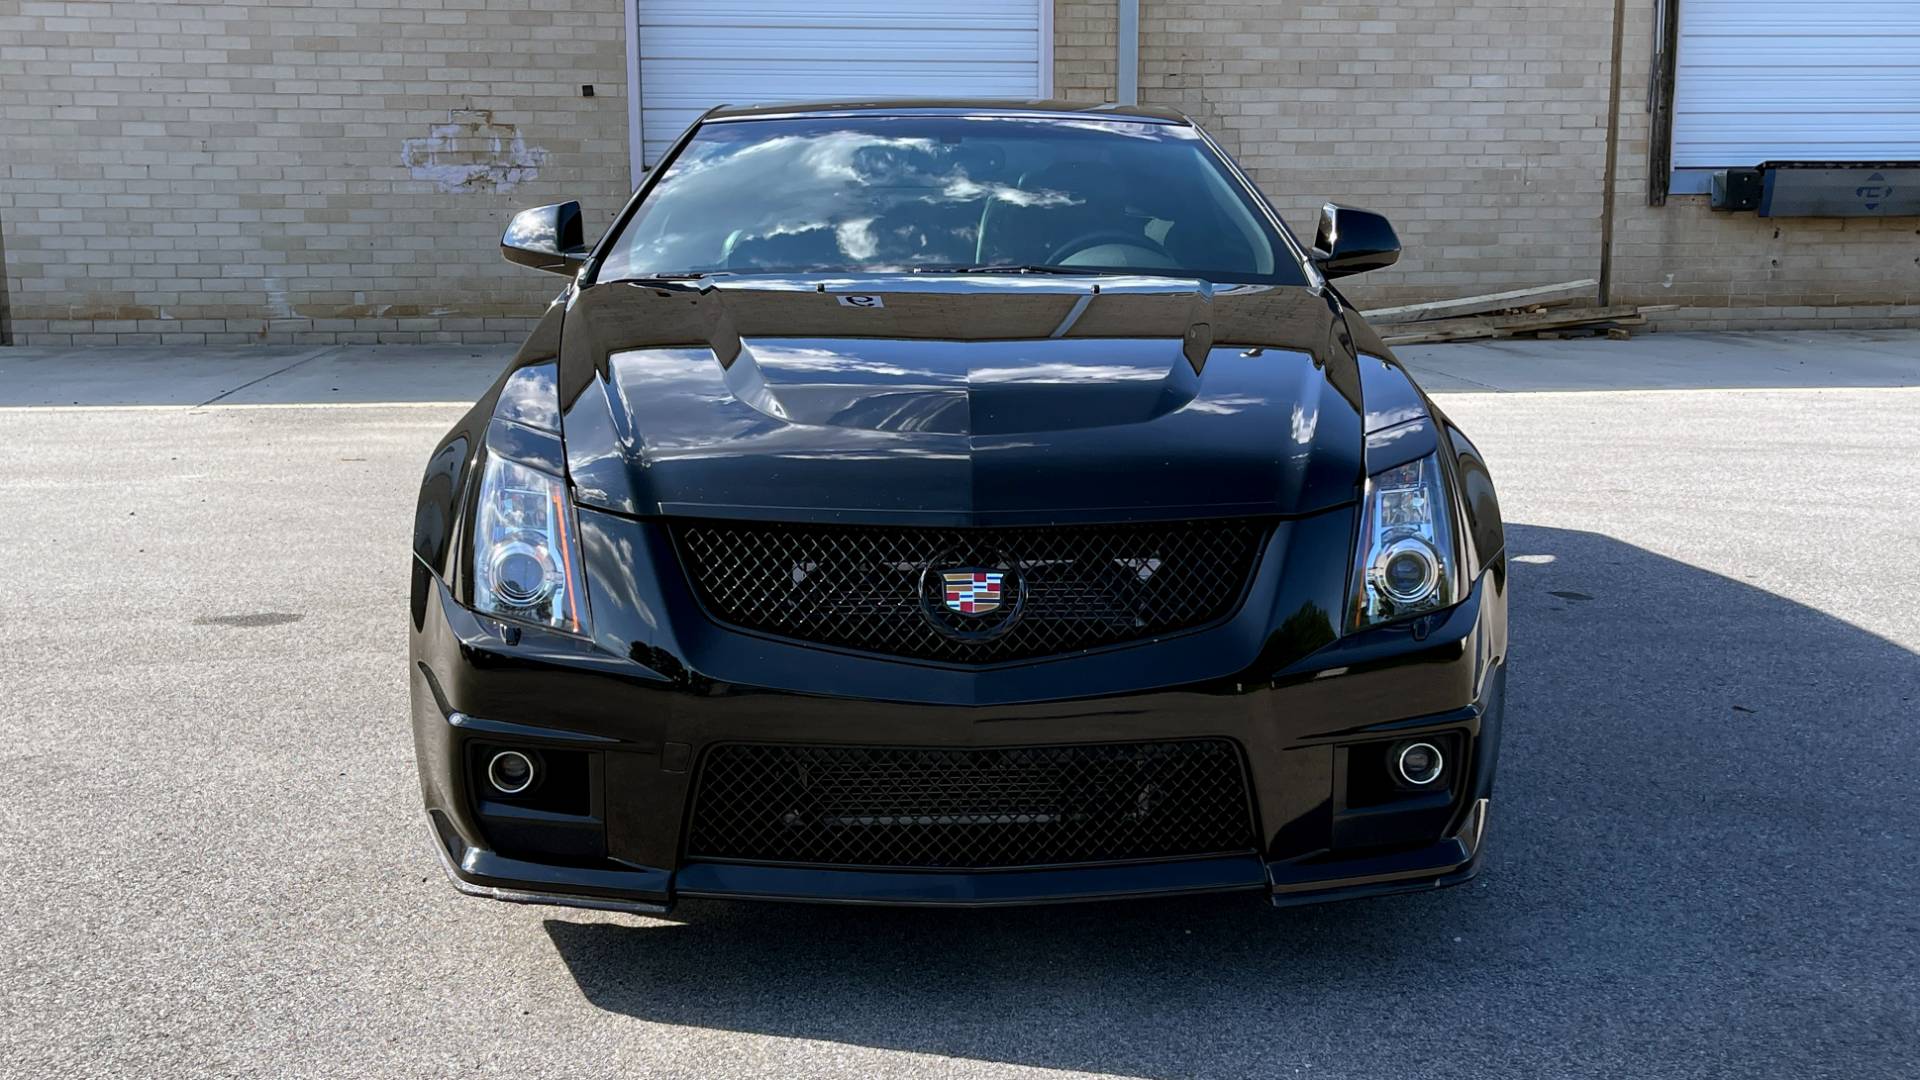 Used 2011 Cadillac CTS-V COUPE 6.2L 600HP+ / NAV / BOSE / SUNROOF / RECARO / 19IN WHLS / REARVIEW for sale $39,995 at Formula Imports in Charlotte NC 28227 7